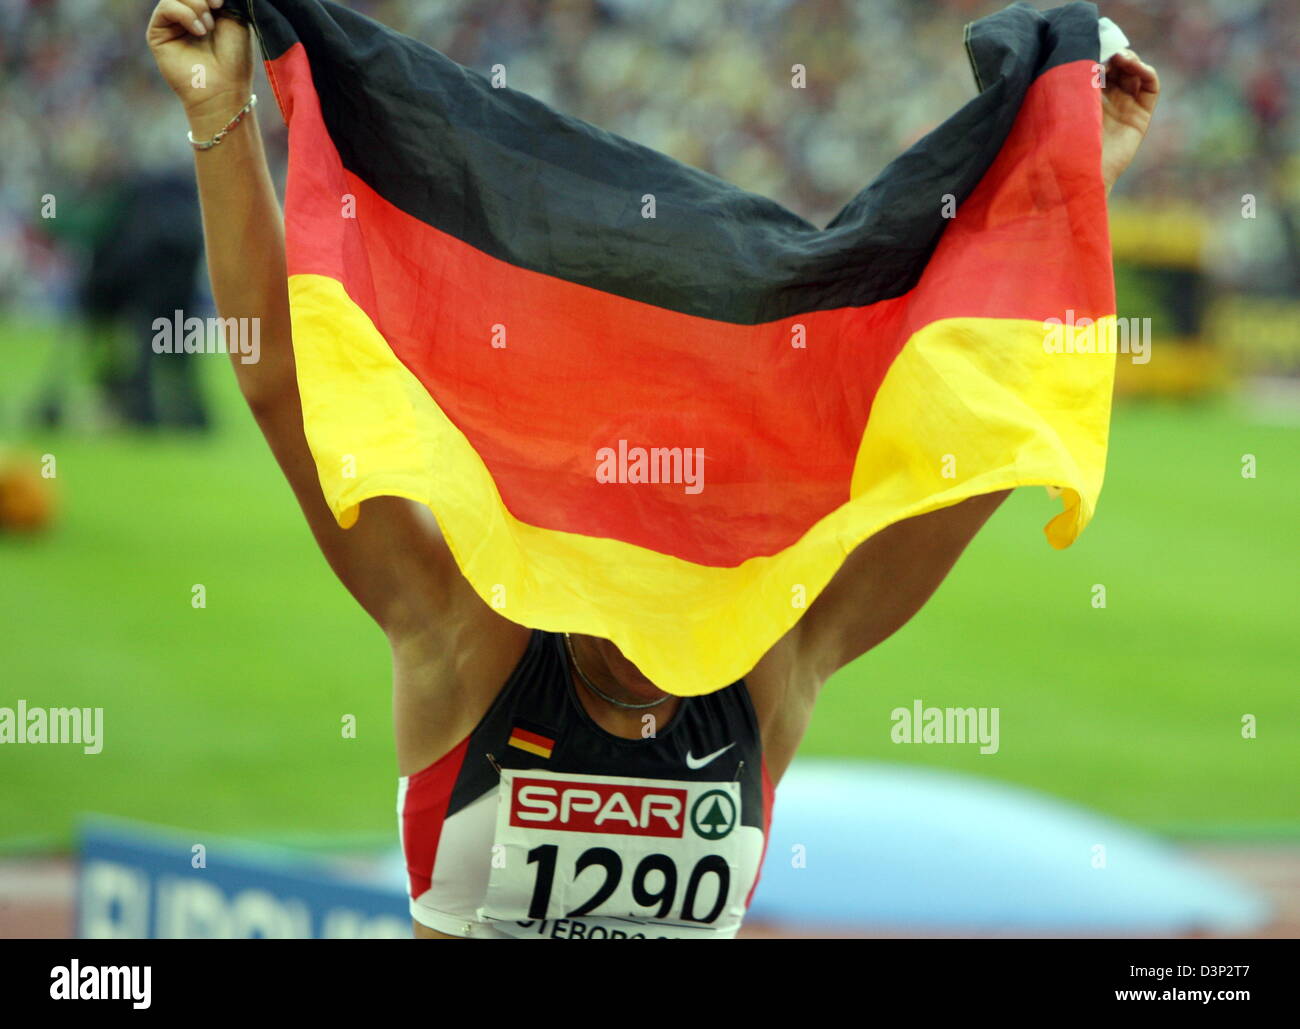 German athlete Kirsten Bolm cheers her third place in the 100m Hurdles final of the 19th European Athletics Championships in Gothenburg, Sweden, Friday, 11 August 2006. She was granted the silver medal after checking the photo finish. Photo: Kay Nietfeld Stock Photo